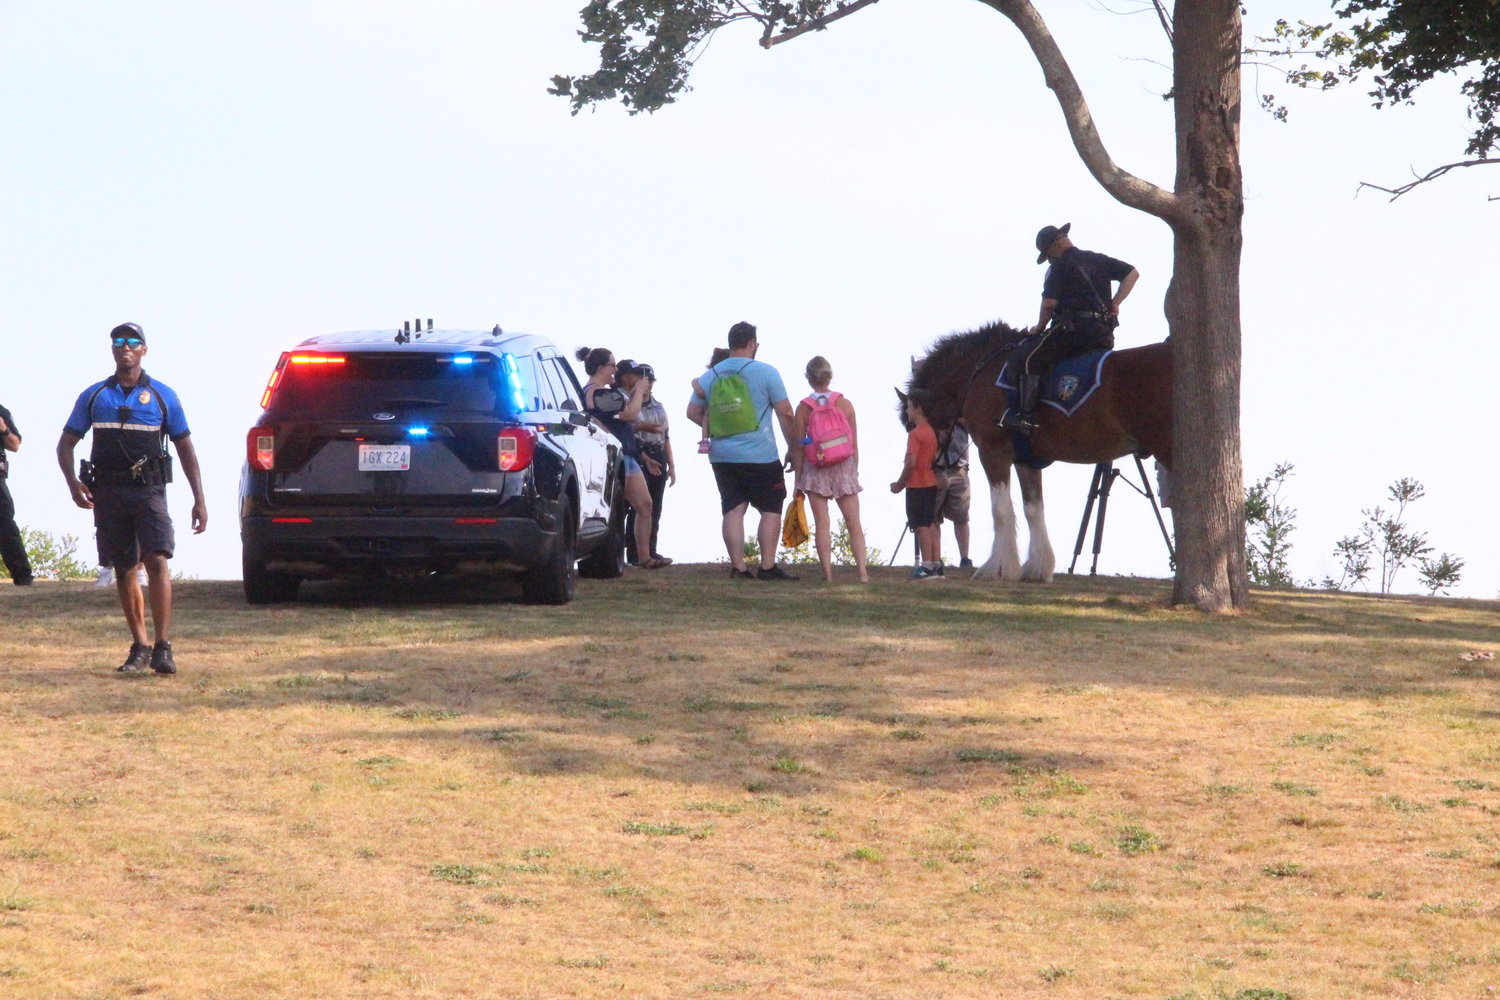 Horse power for police: Those attending National Night Out, which was held for a first time at Rocky Point Tuesday, may have wondered if Warwick Police now have a mounted command. That’s not the case, although Sgt. Steven Courville commander of the visiting Providence Command was a nice touch to an event that was attended by thousands. (Warwick Beacon photos)